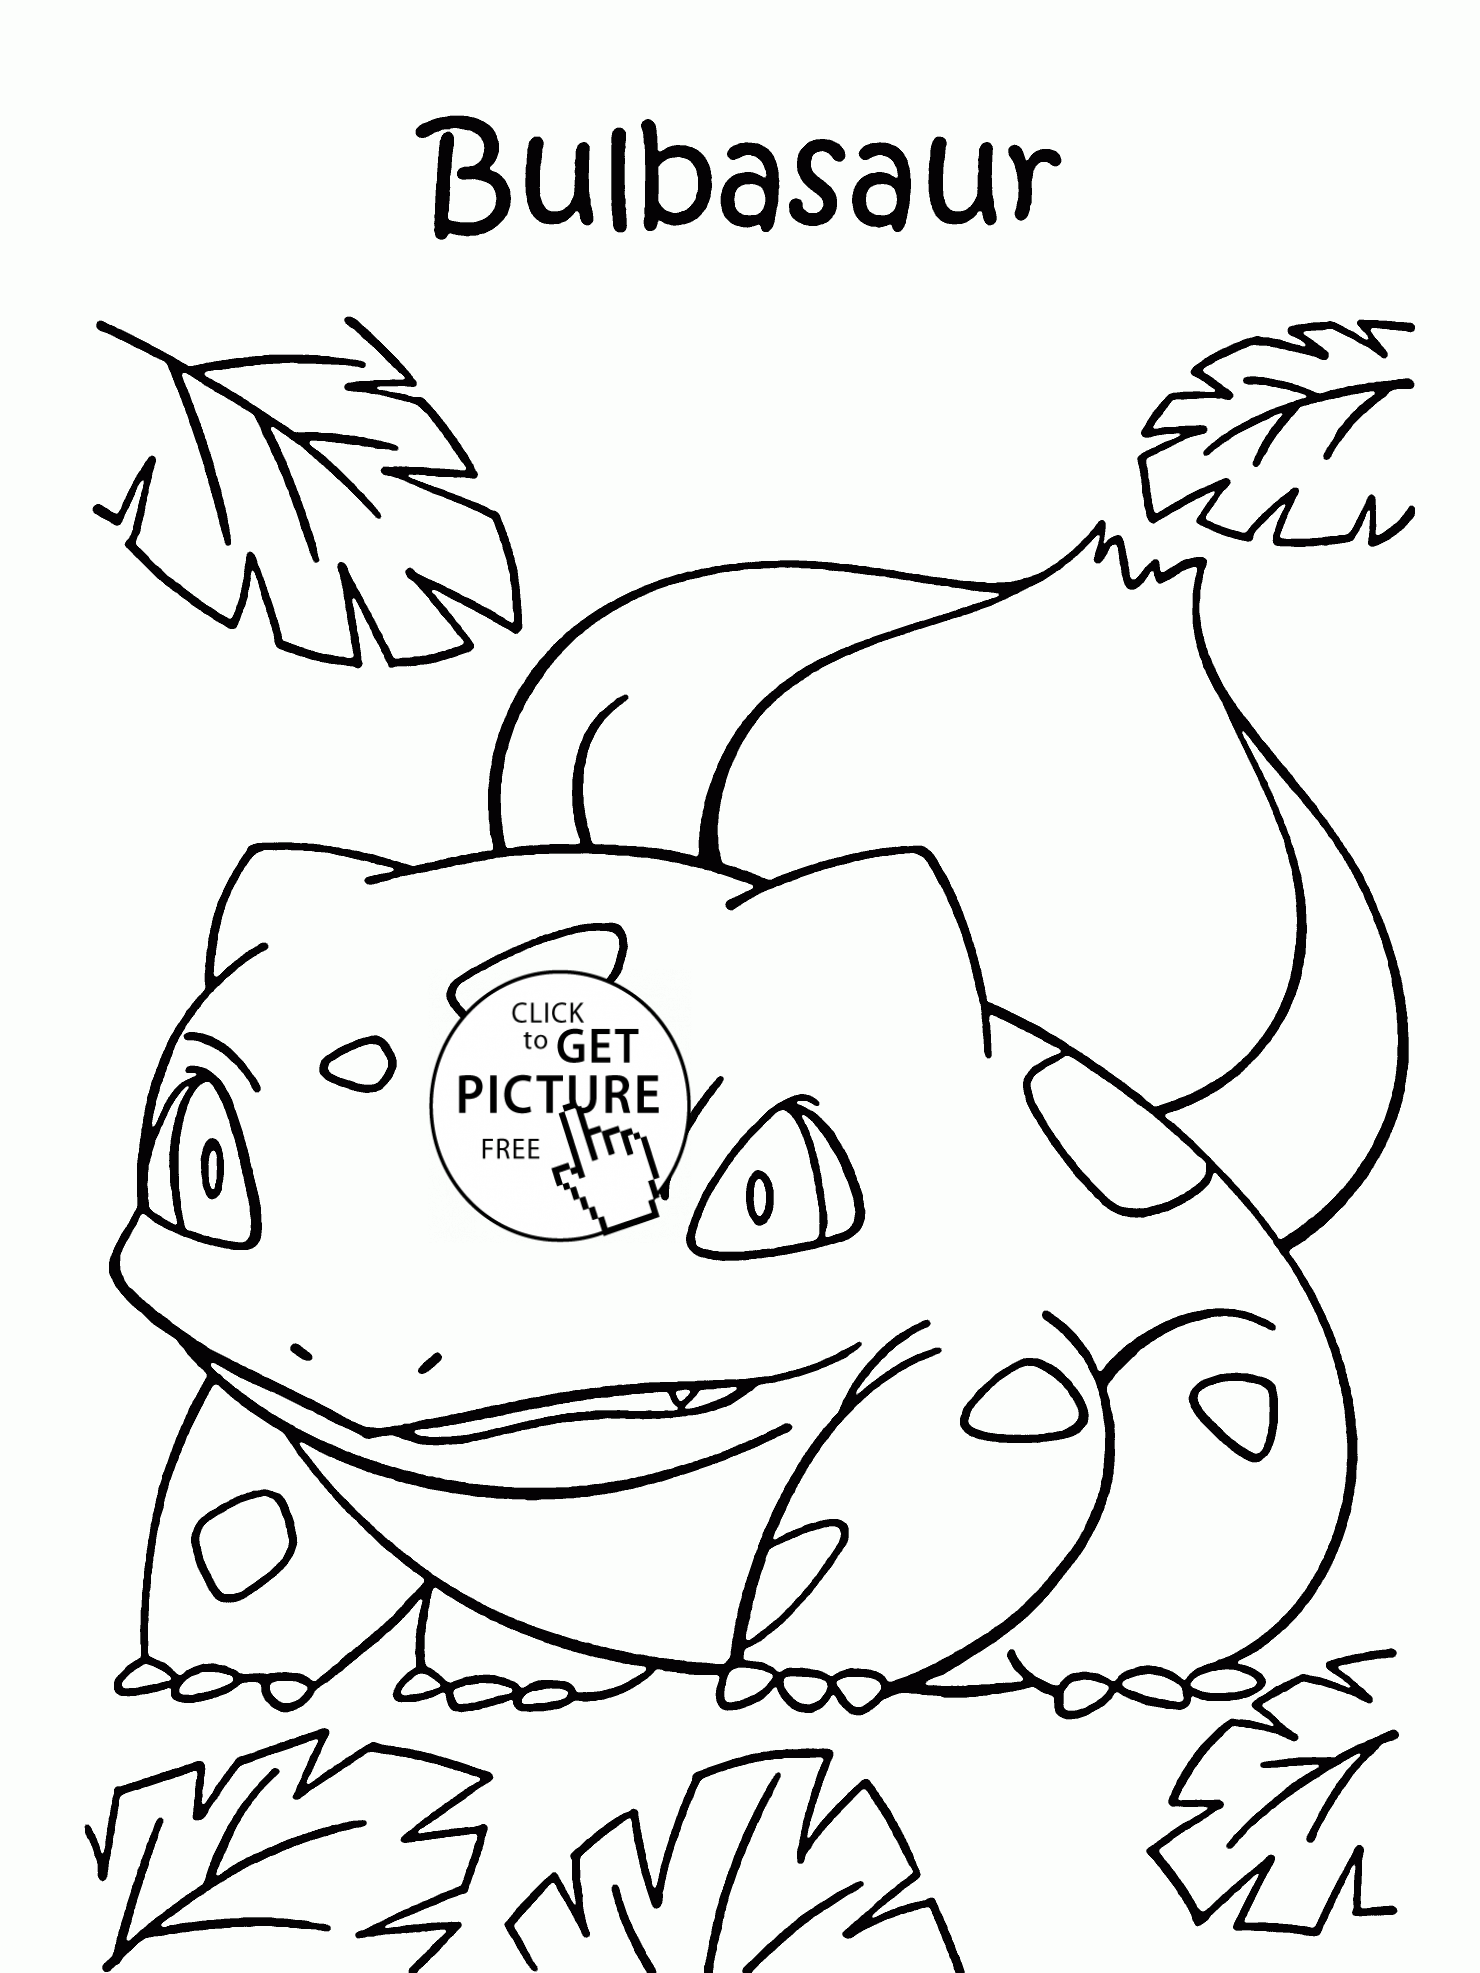 Bulbasaur pokemon coloring pages for kids pokemon characters printables free